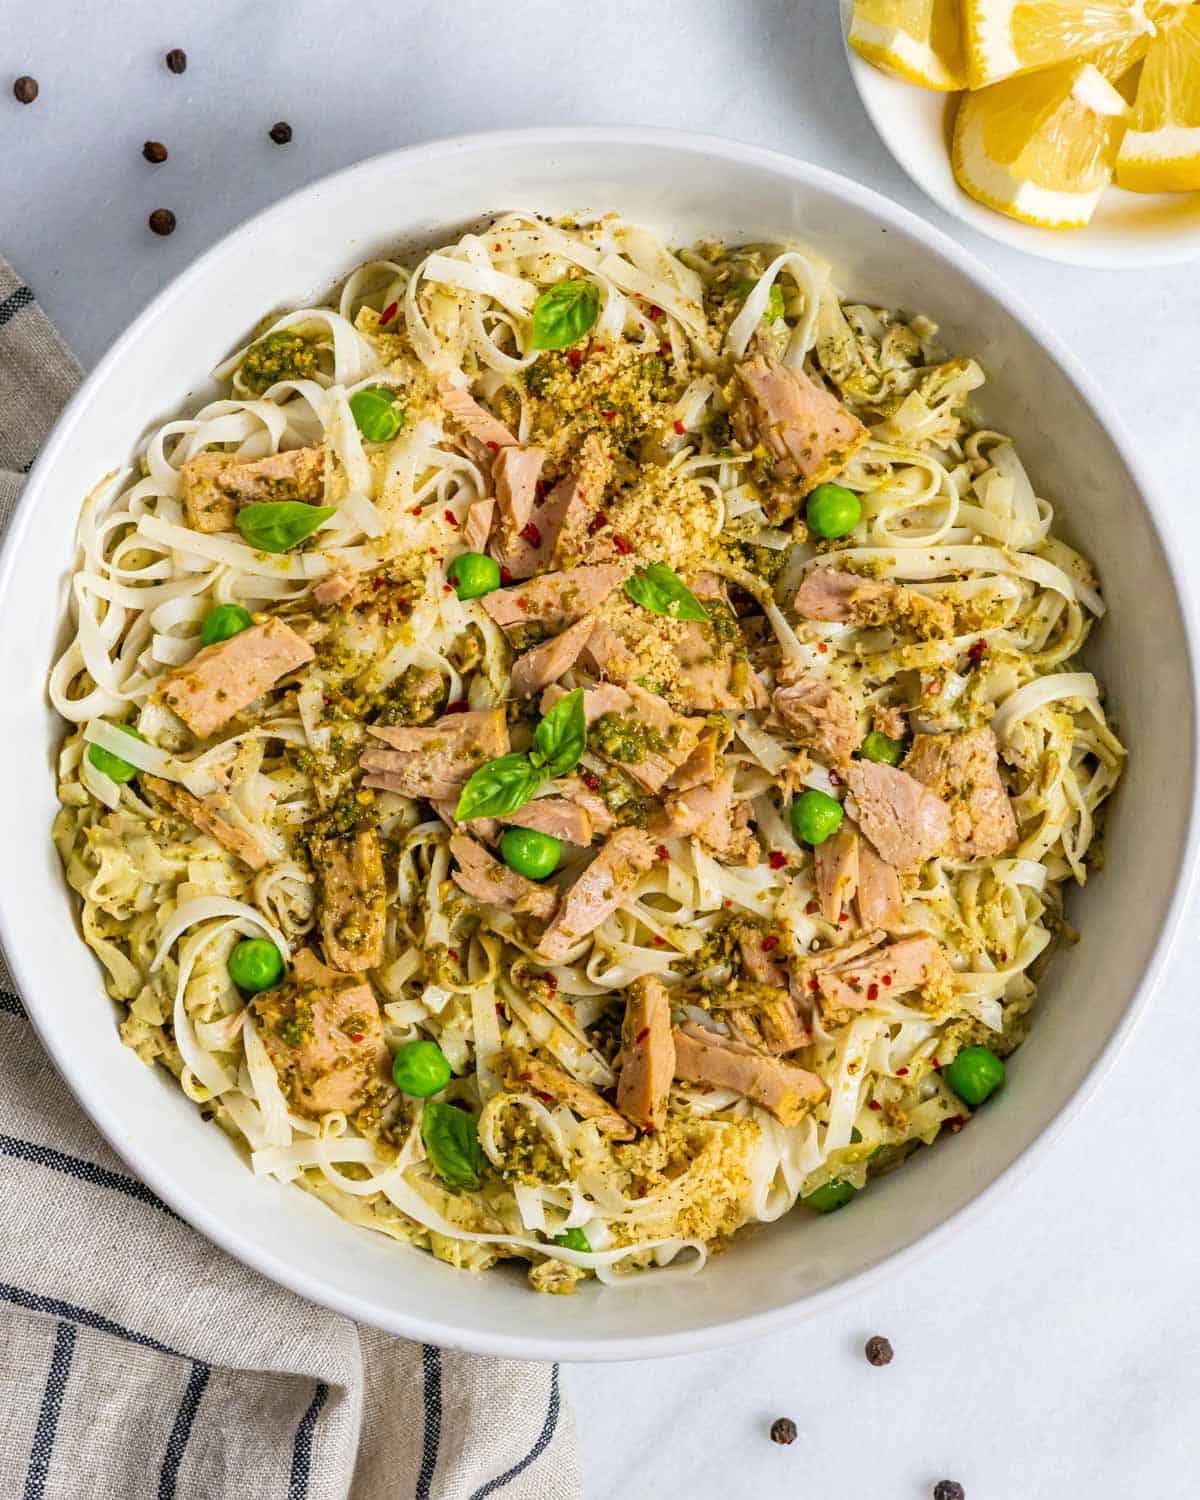 Bowl of pasta with tuna and pesto decorated with basil leaves.